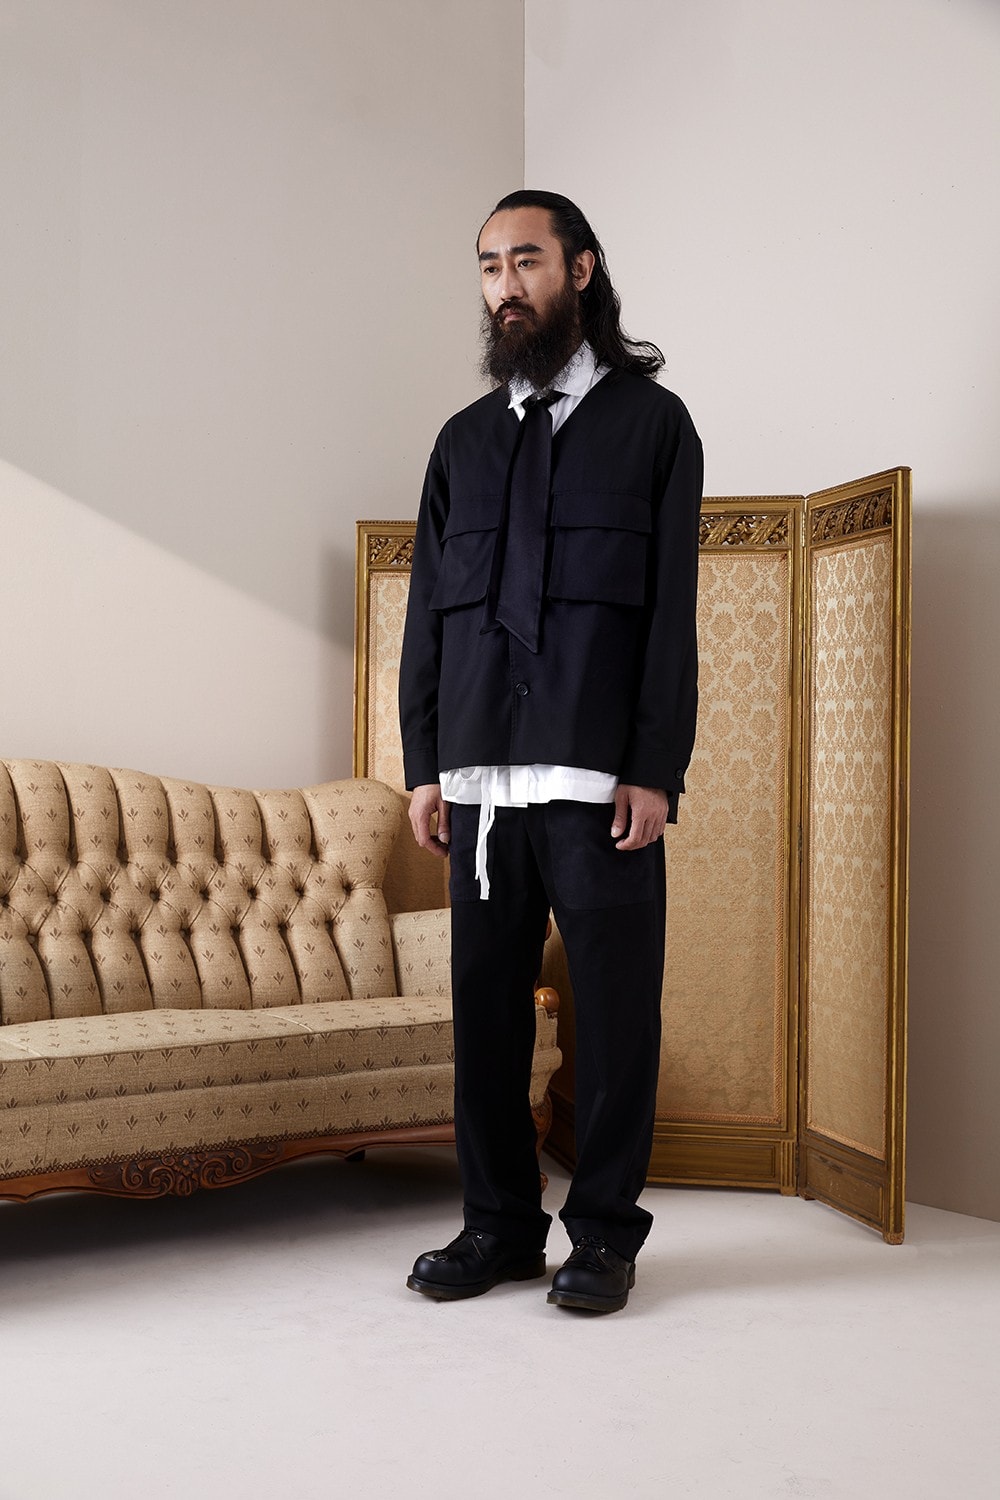 ANOWHEREMAN Release FW 2020 Lookbook fashion Taiwan brand rebranding fall winter outfit mix and match social issues capitalism 